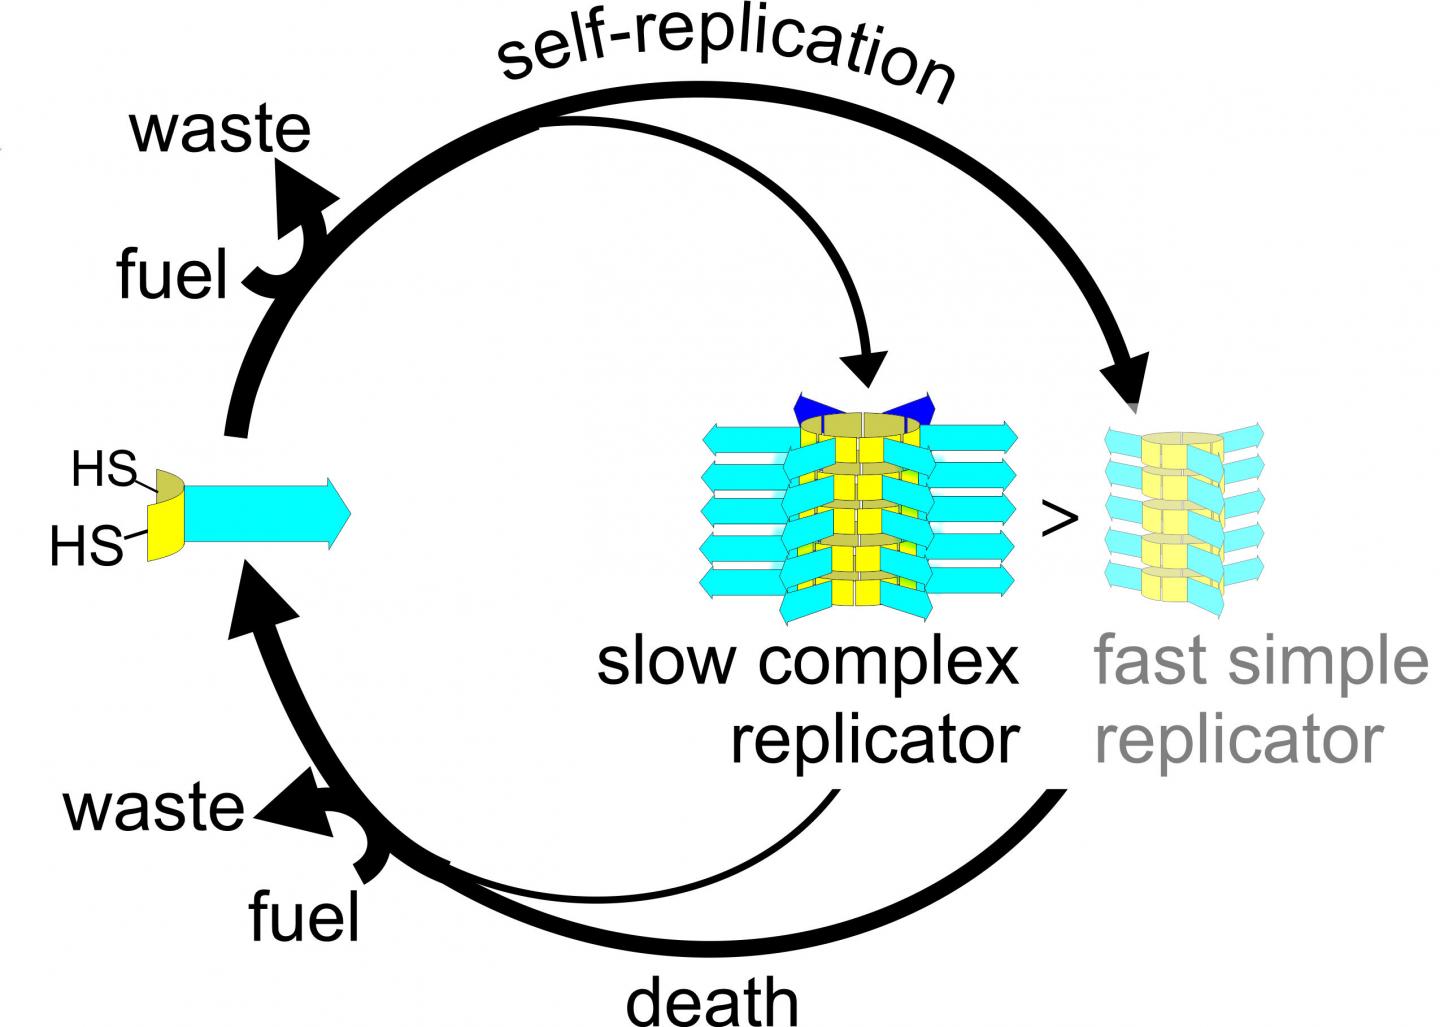 Life cycle of complex and simple replicators